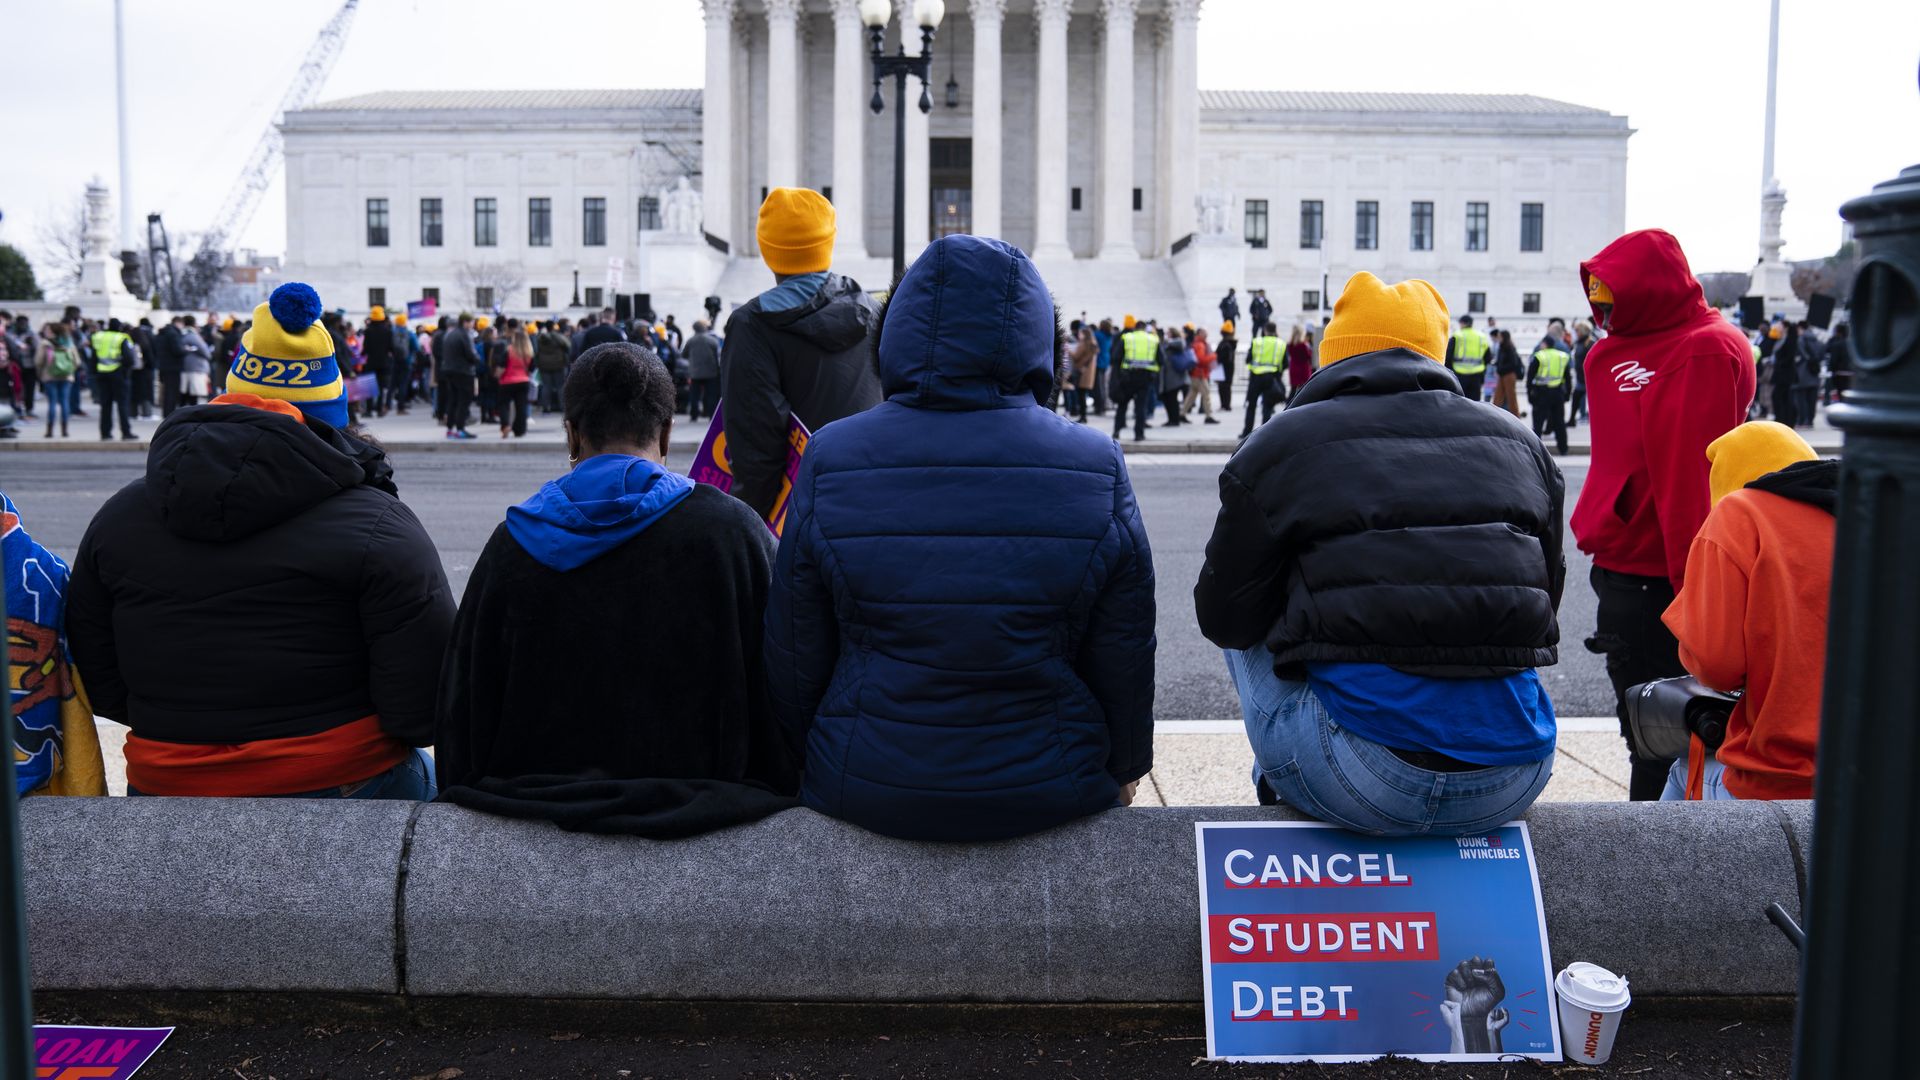 People gather during a protest in support of student debt cancellation as the Supreme Court begins oral arguments outside of the Supreme Court of the United States in Washington, D.C., on Tuesday February 28, 2023